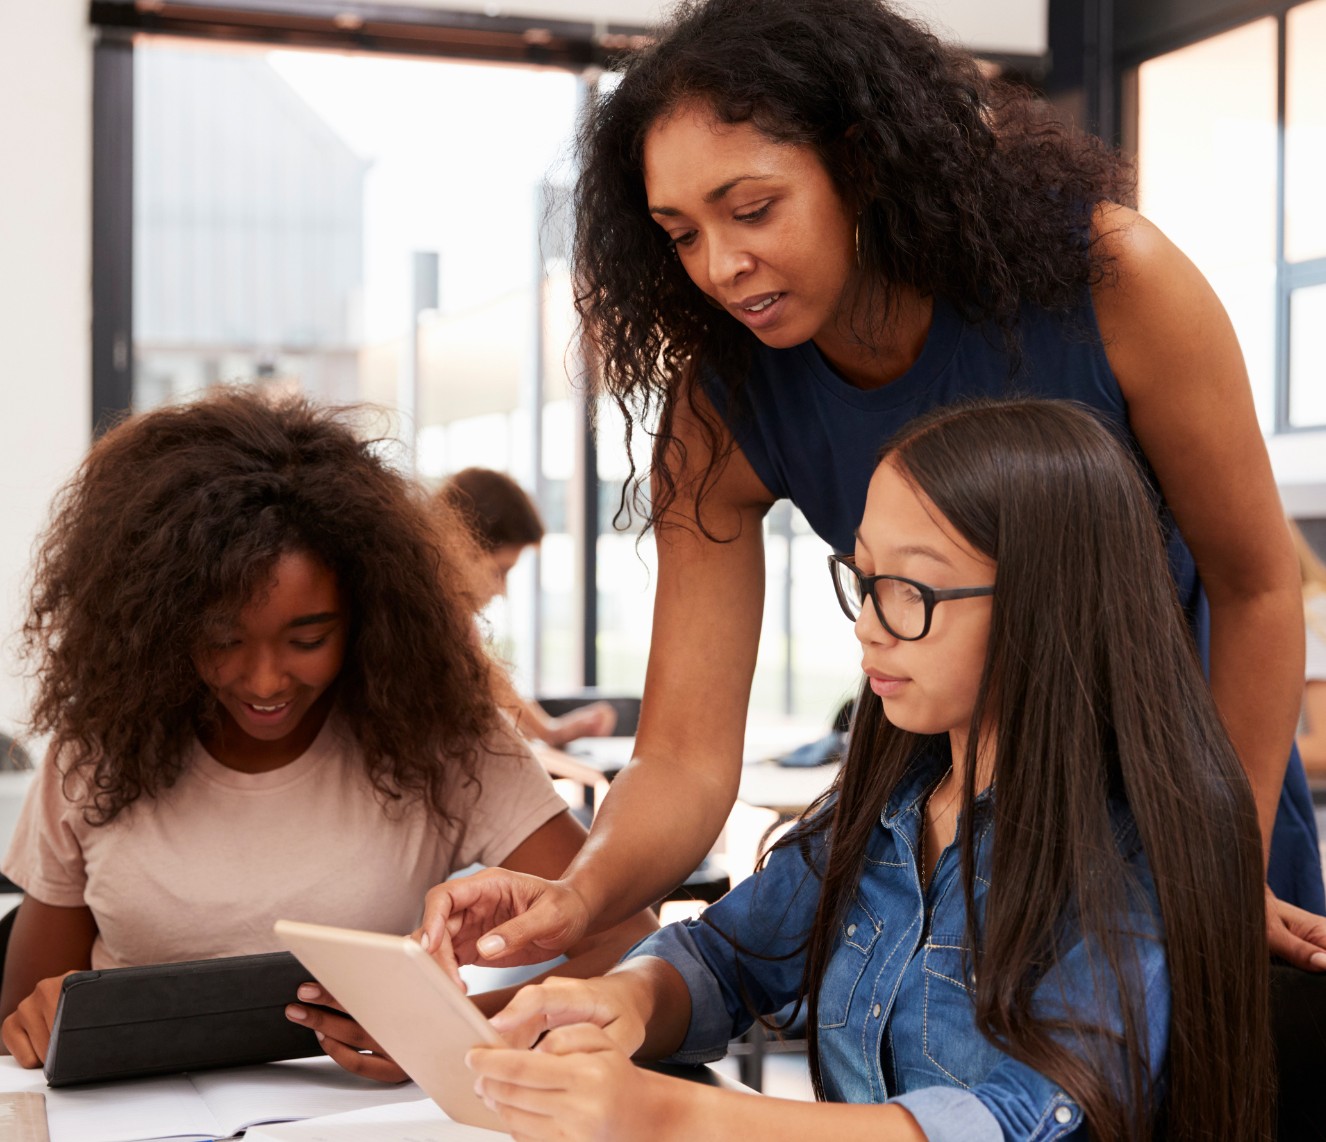 A woman of colour is leaning over two female students. The student on the left is a girl of colour, smiling at an iPad. The student on the right is an Asian girl with long hair and glasses, also looking at an iPad.